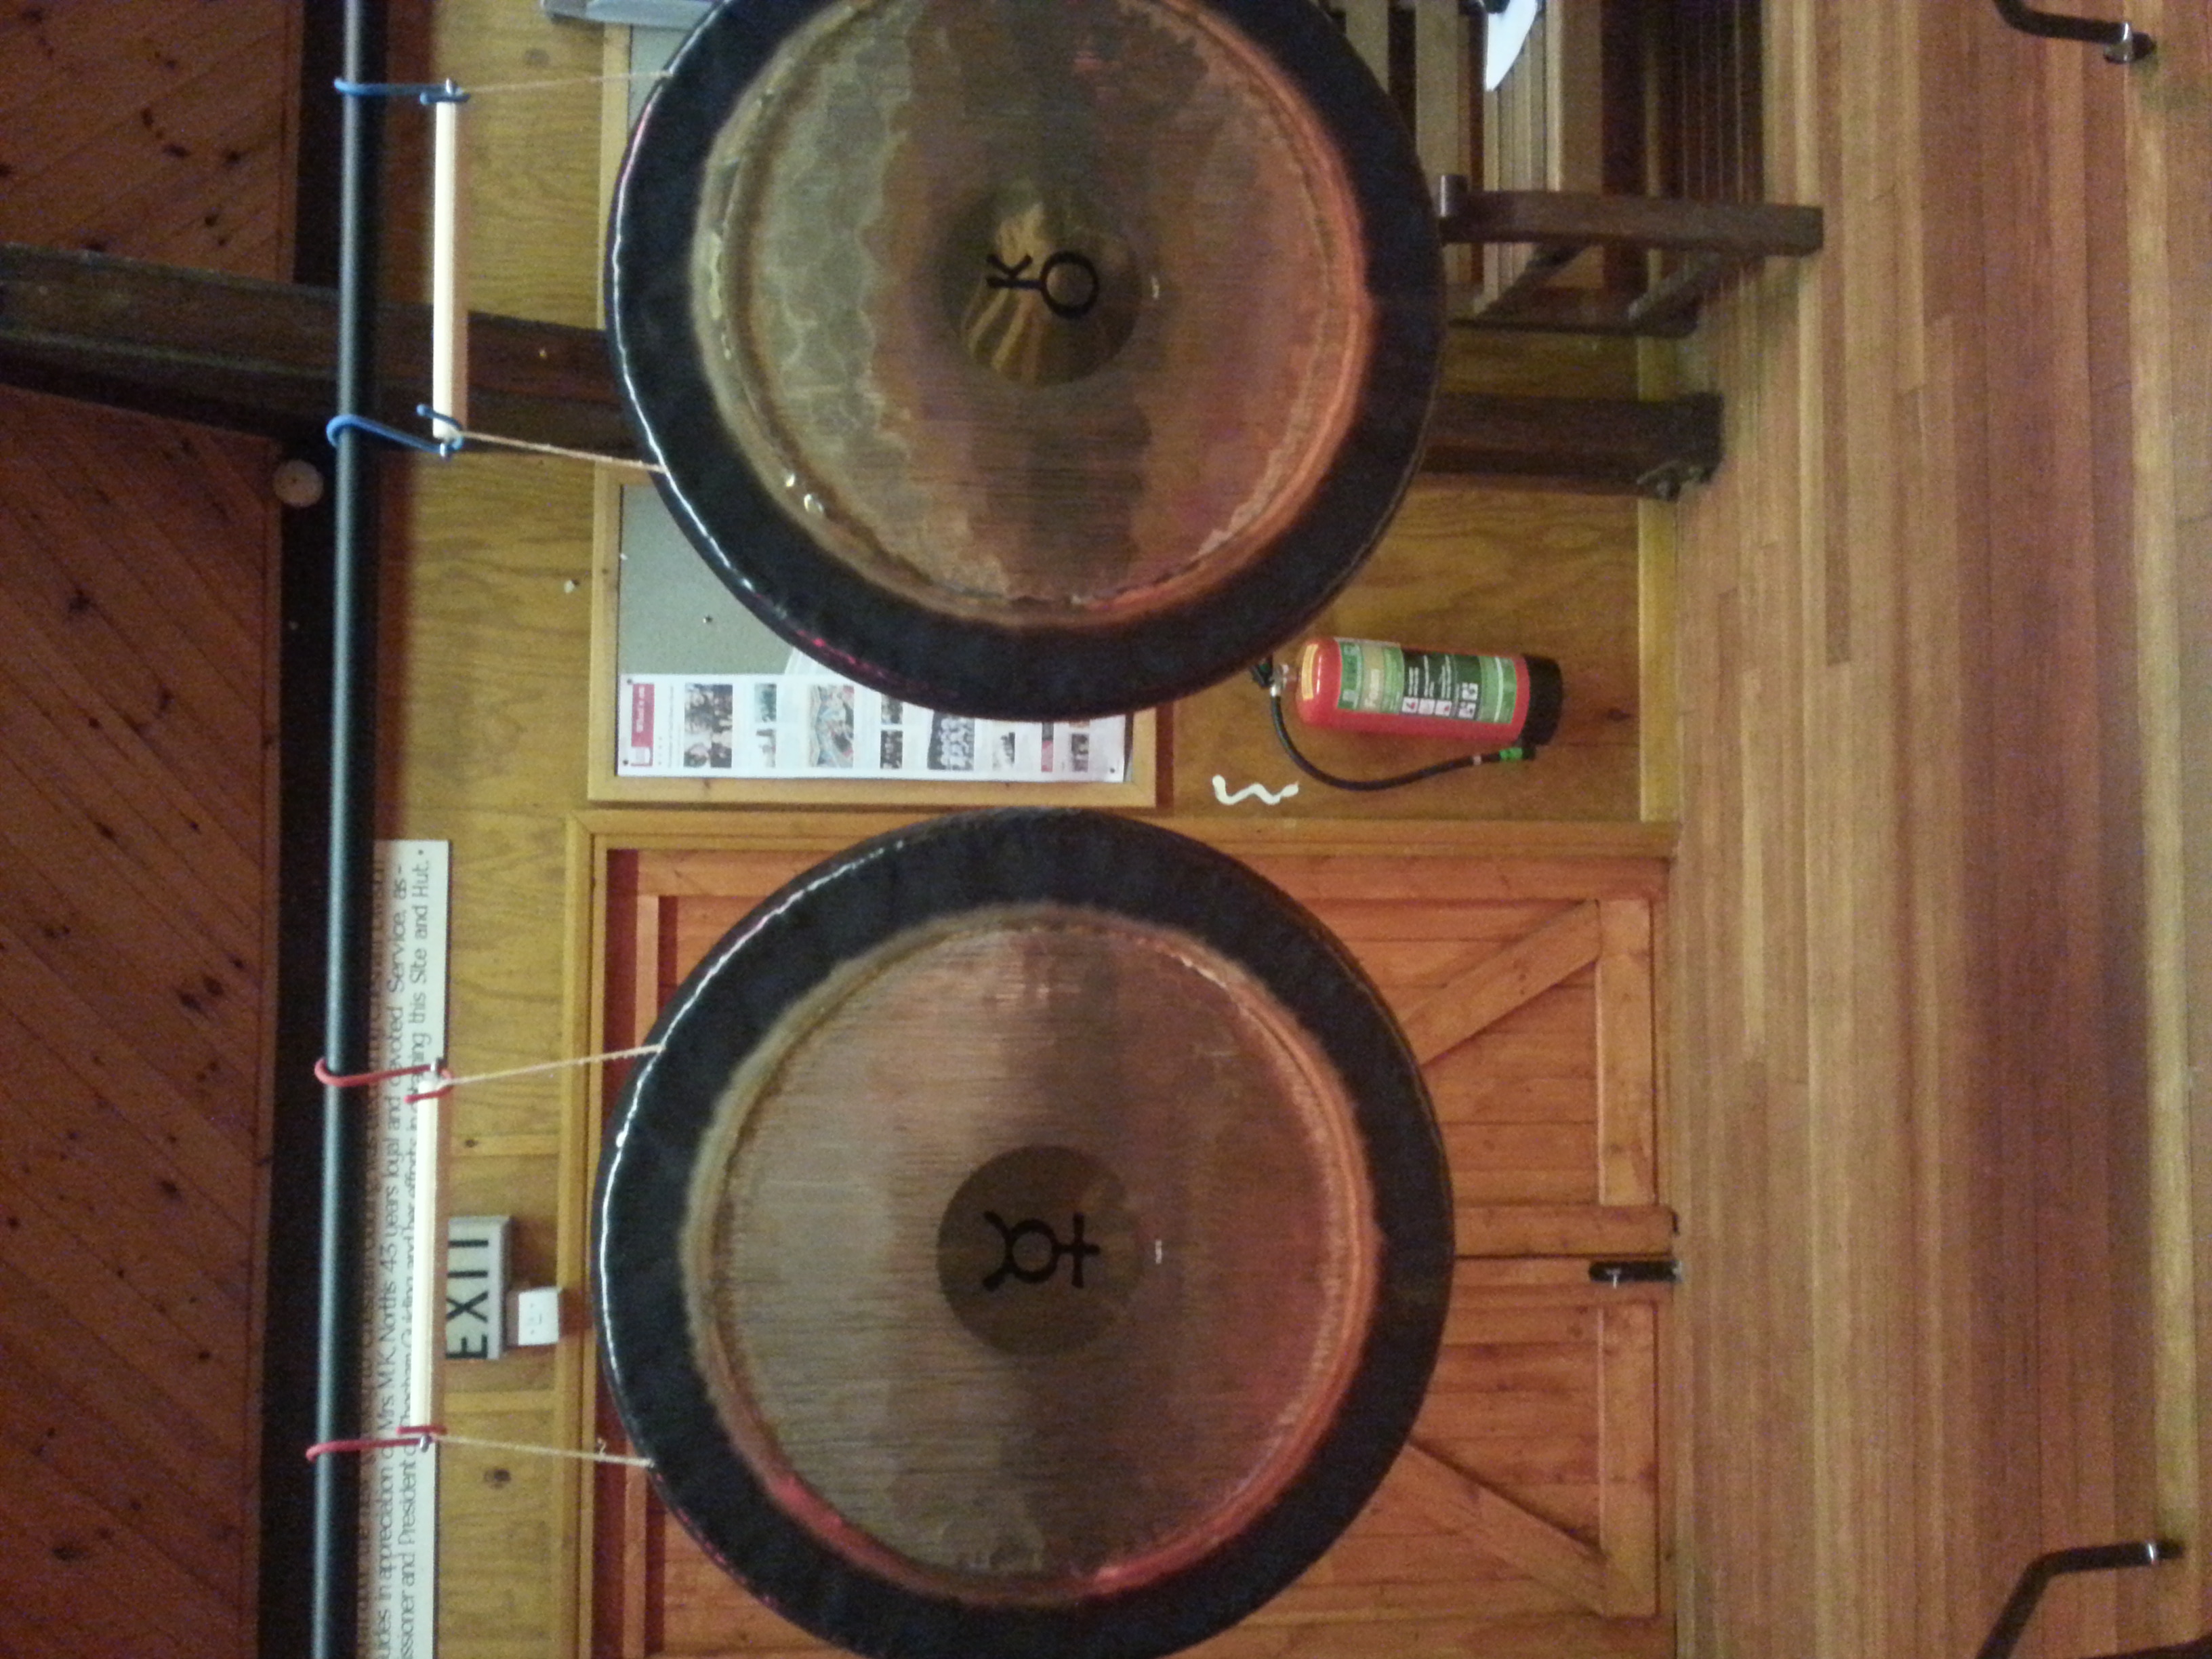 OXFORDSHIRE - Gong Sound Bath - Bicester